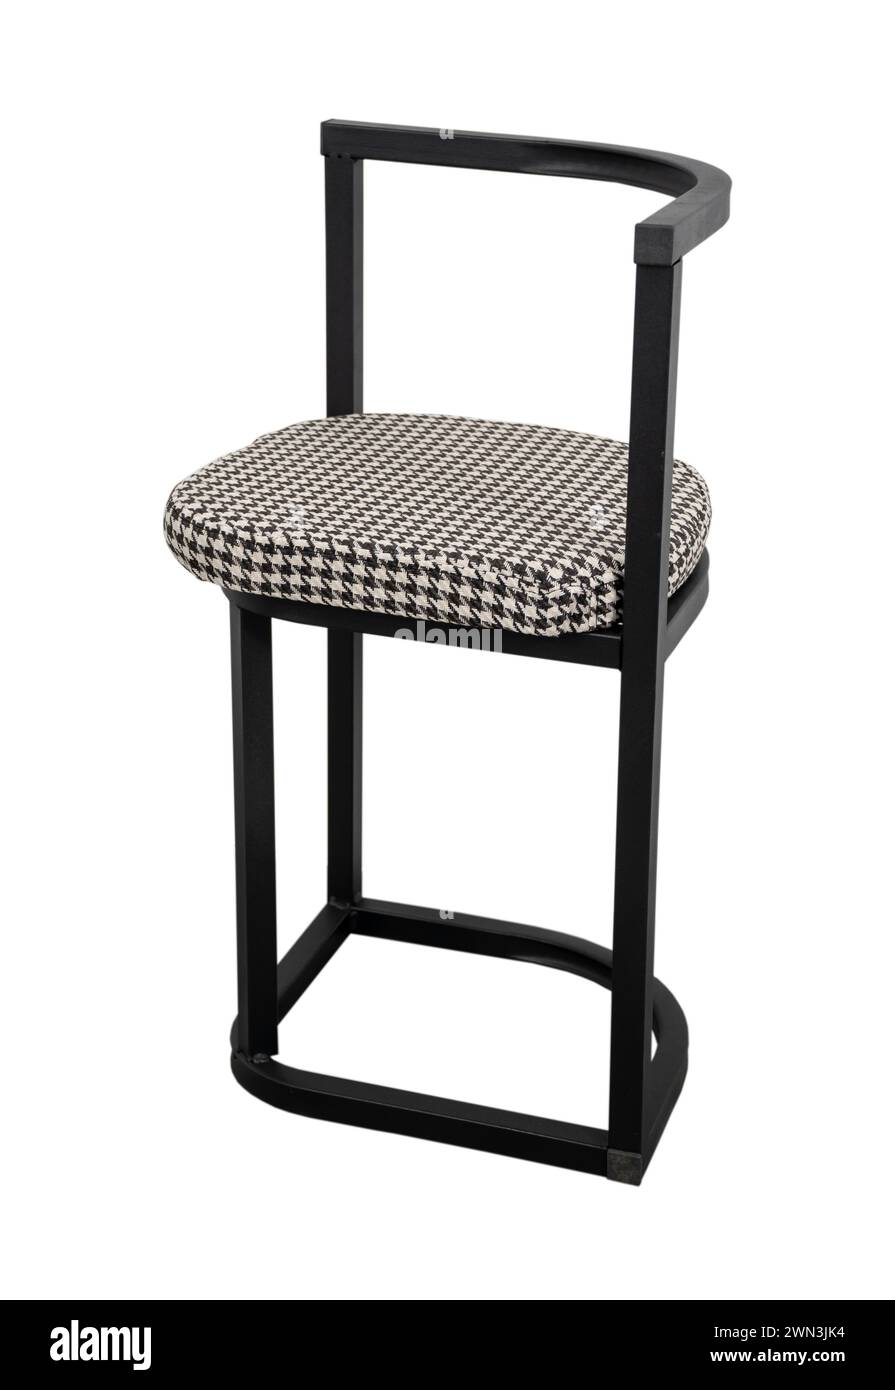 Monochrome chair with houndstooth fabric Stock Photo